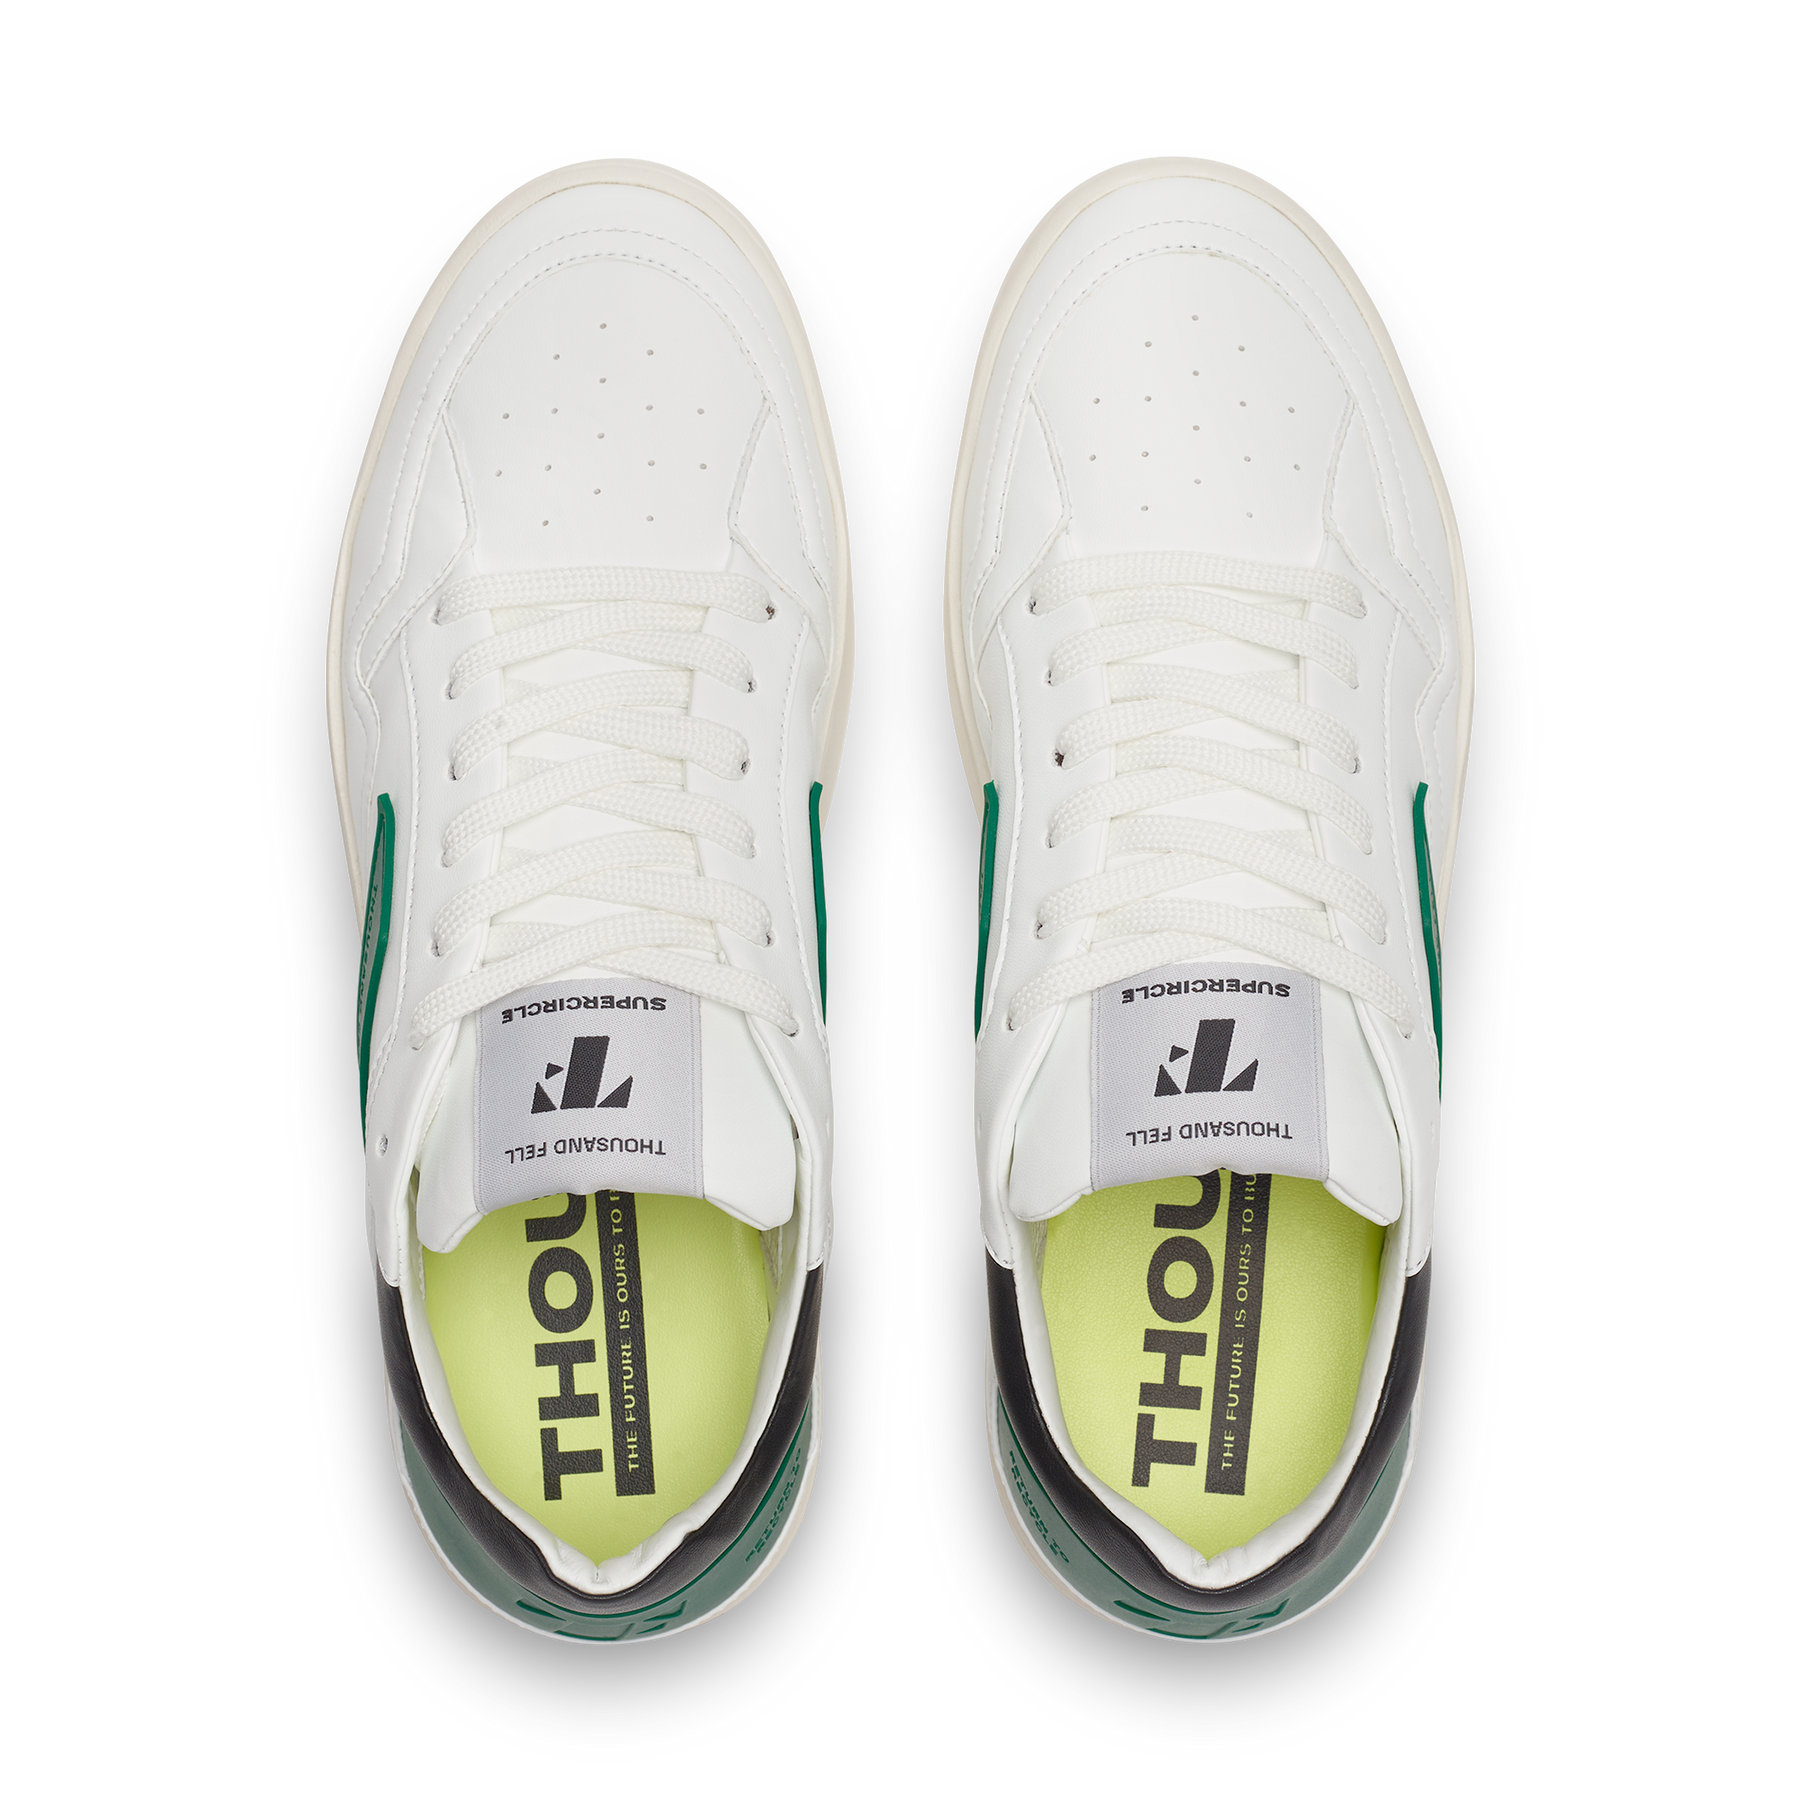 top view of white sneakers with black and green details, ethically made from recycled materials